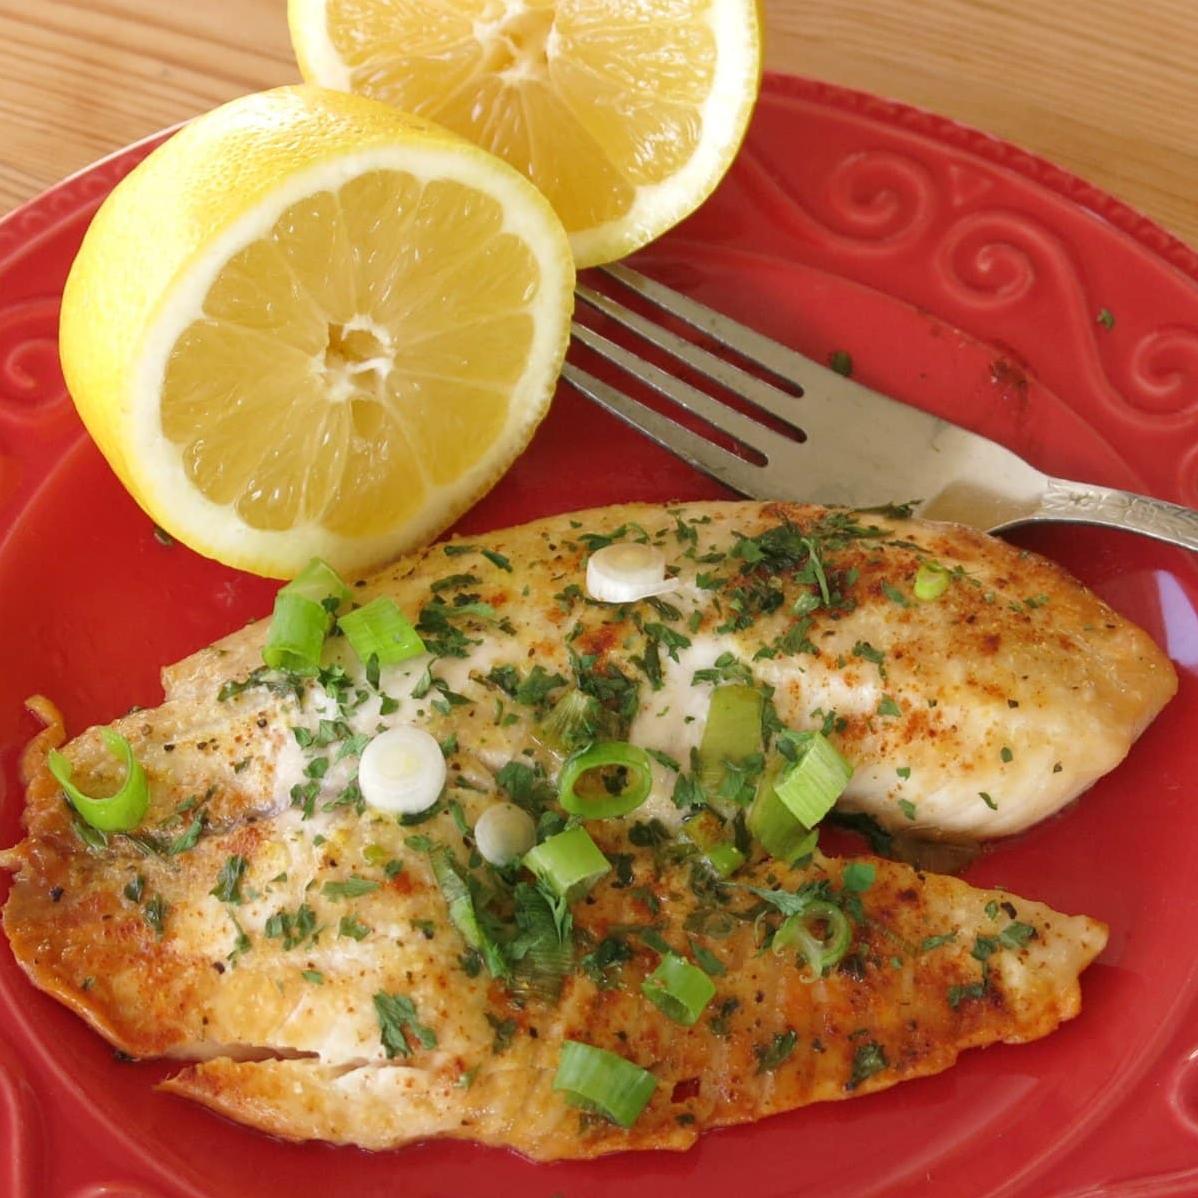  The lightness of the tilapia and freshness of the lemon come together in perfect harmony.